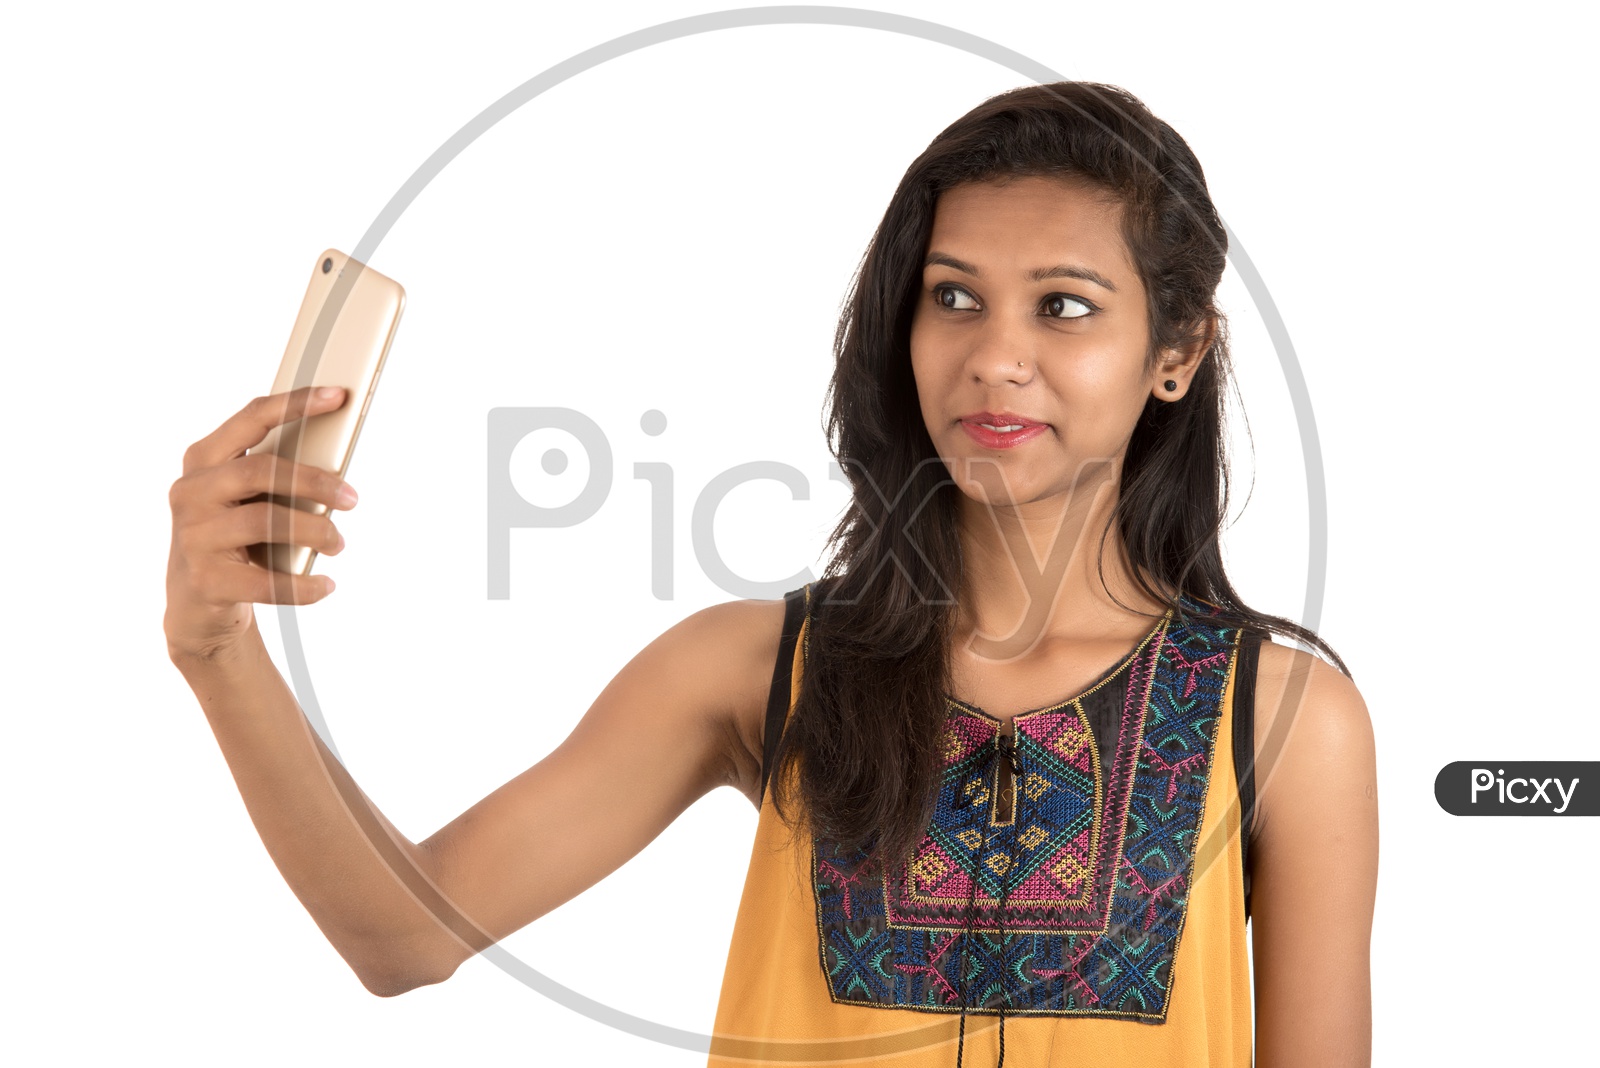 Young Indian Girl Taking Selfie With Mobile Or Smartphone  On an Isolated White Background